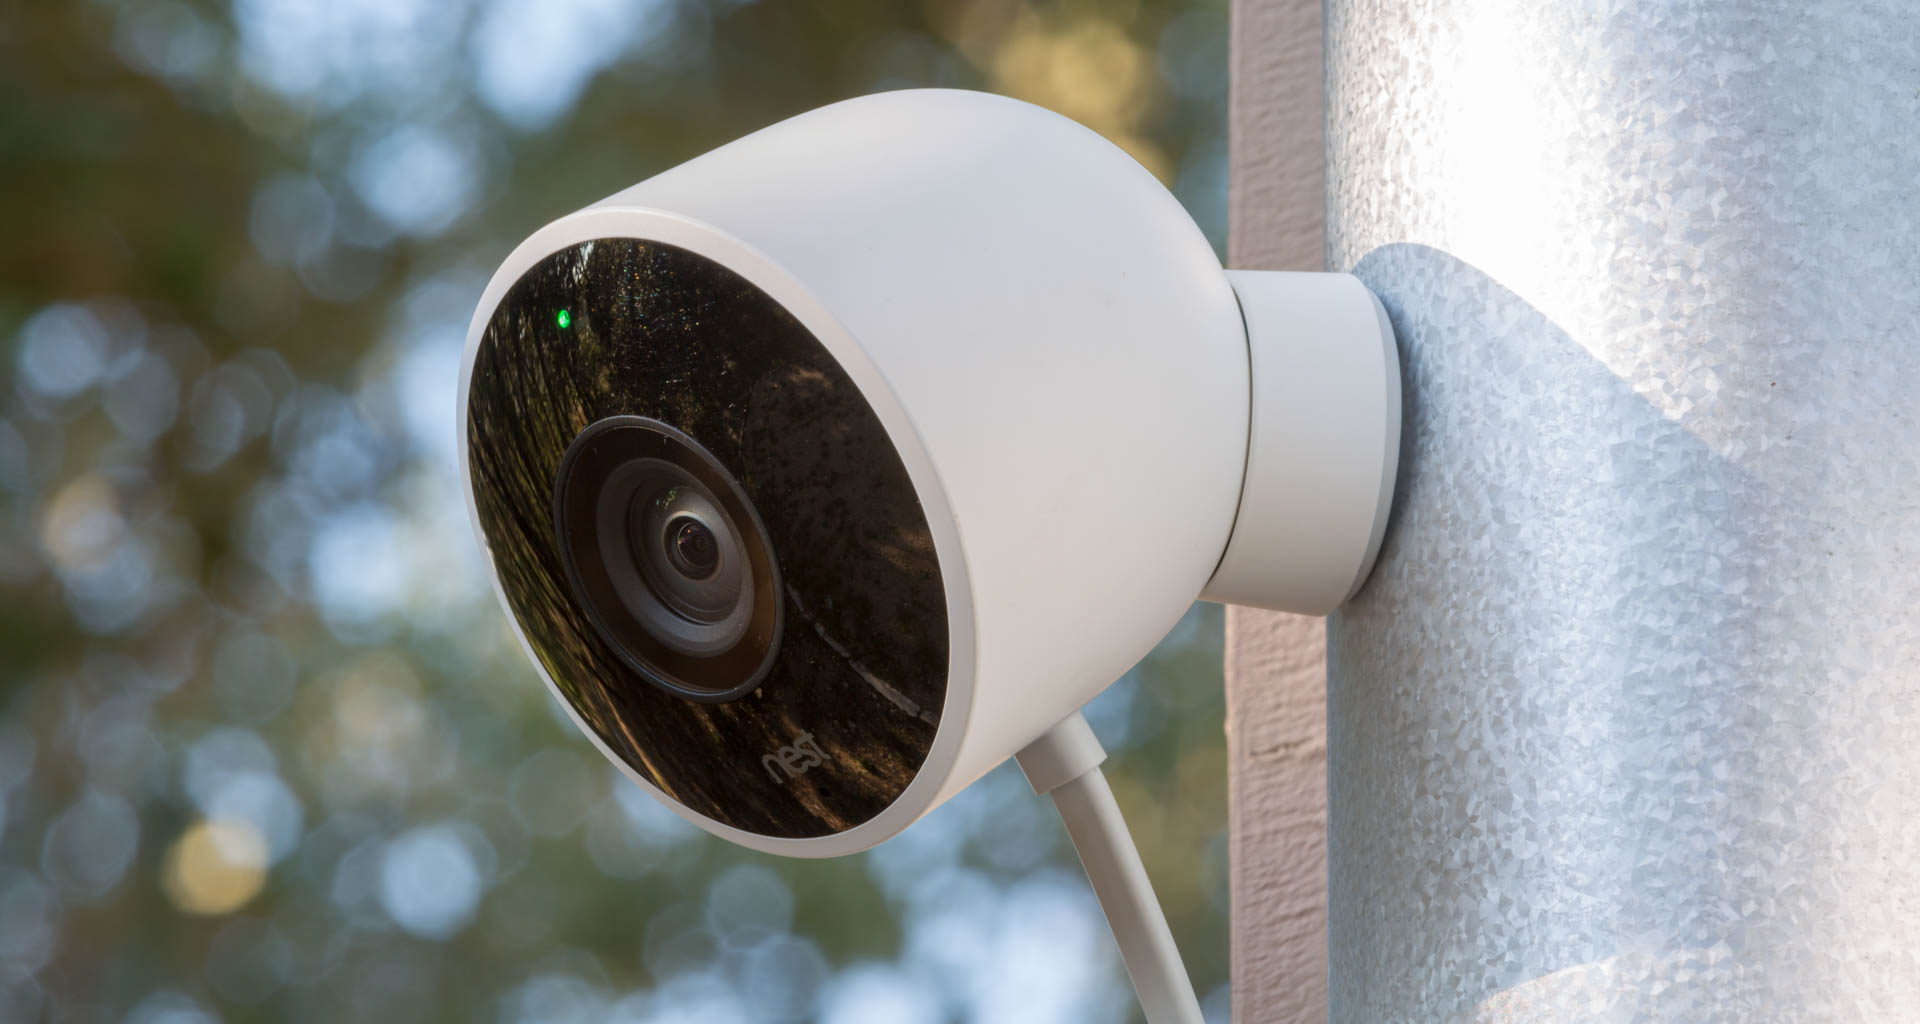 Security cameras are among the smart home devices most requested by home buyers. Image: Digitized House Media.